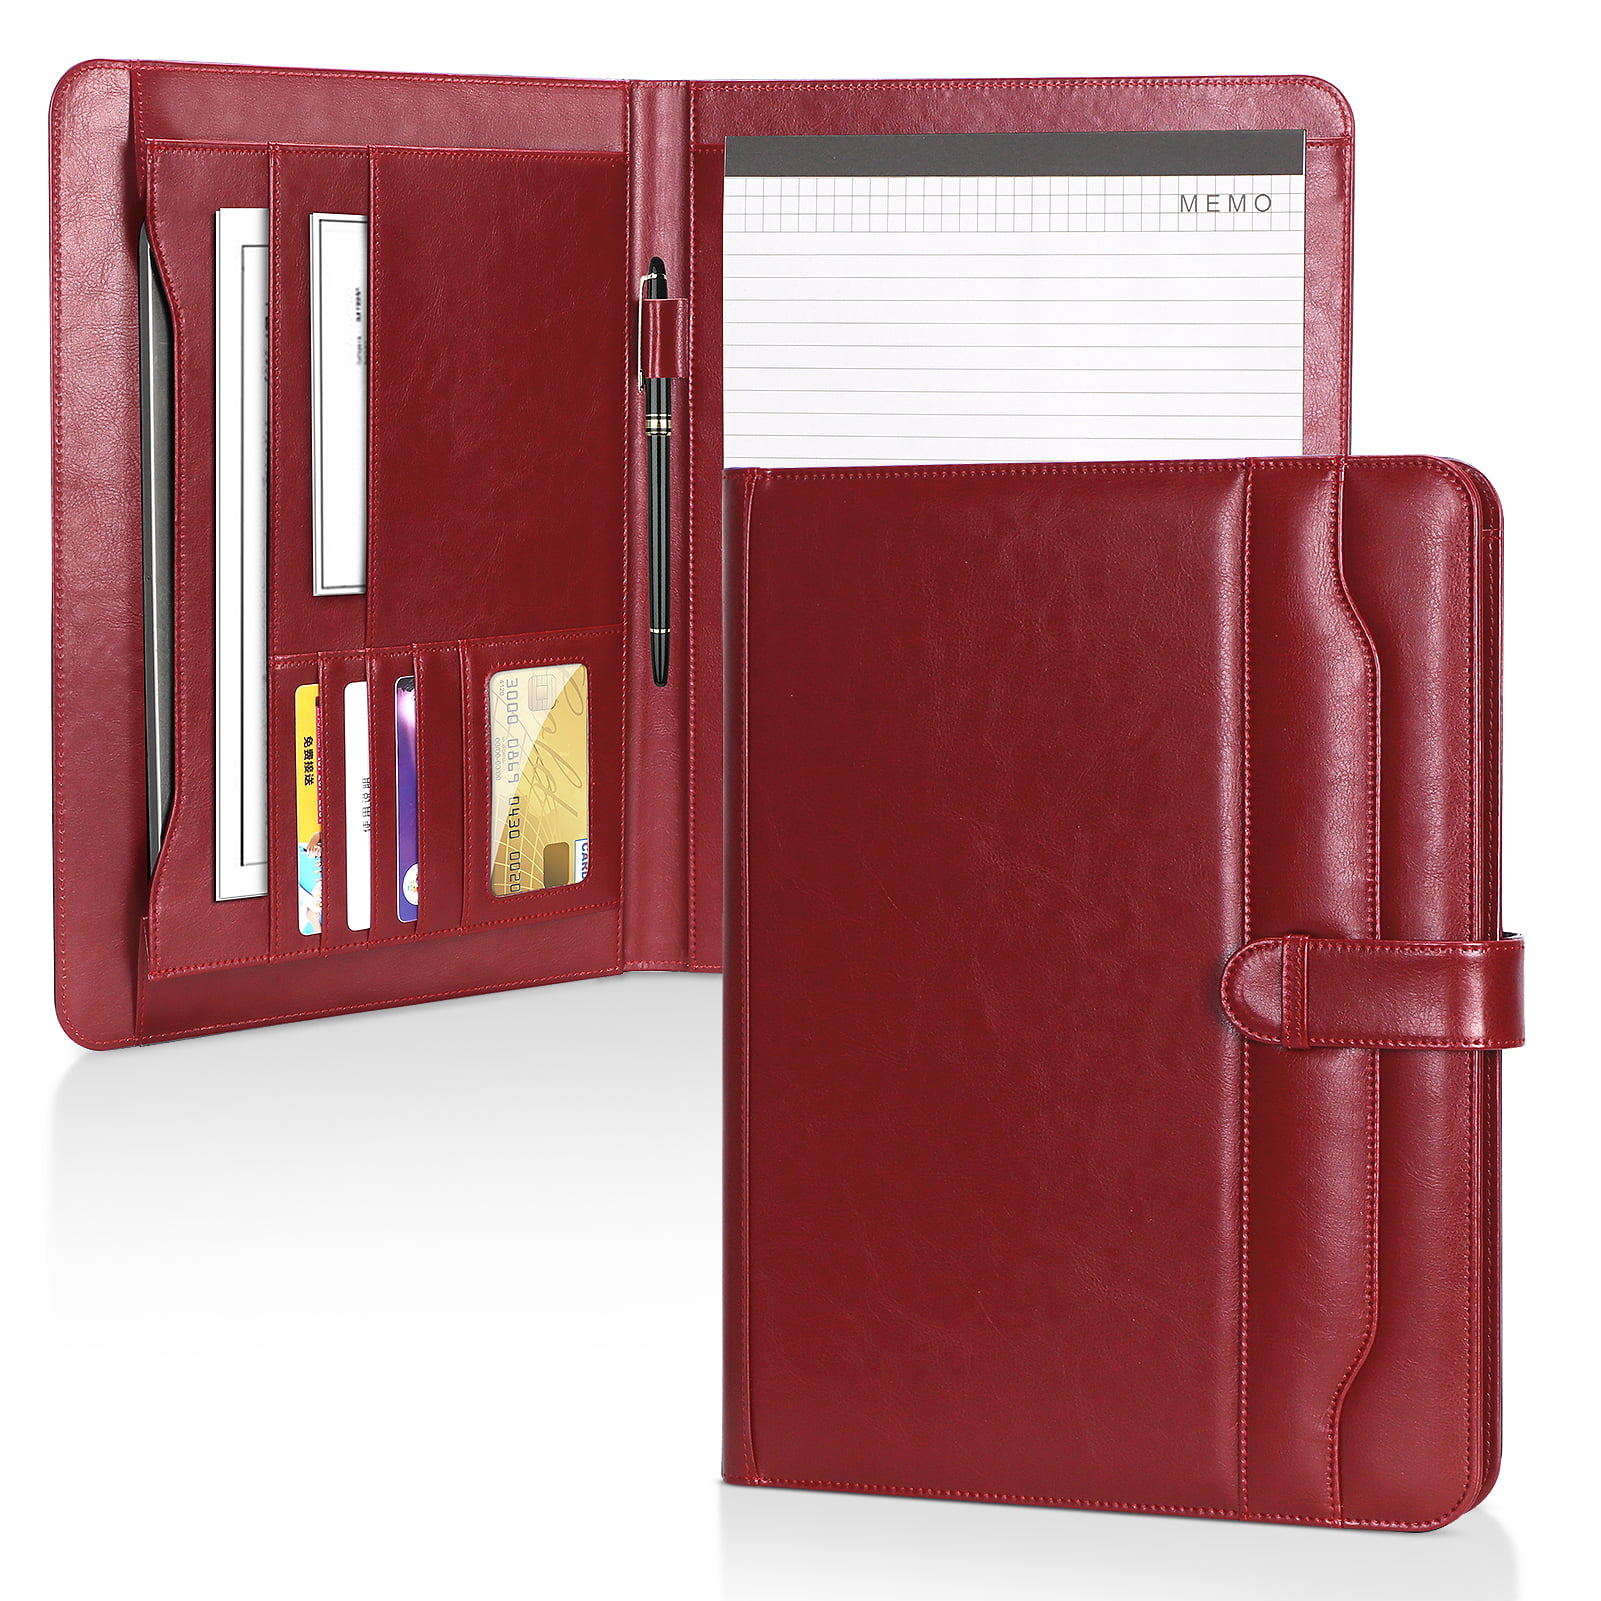 A4 Leather Conference Folder Portfolio Document Holder Organiser With Power Bank 